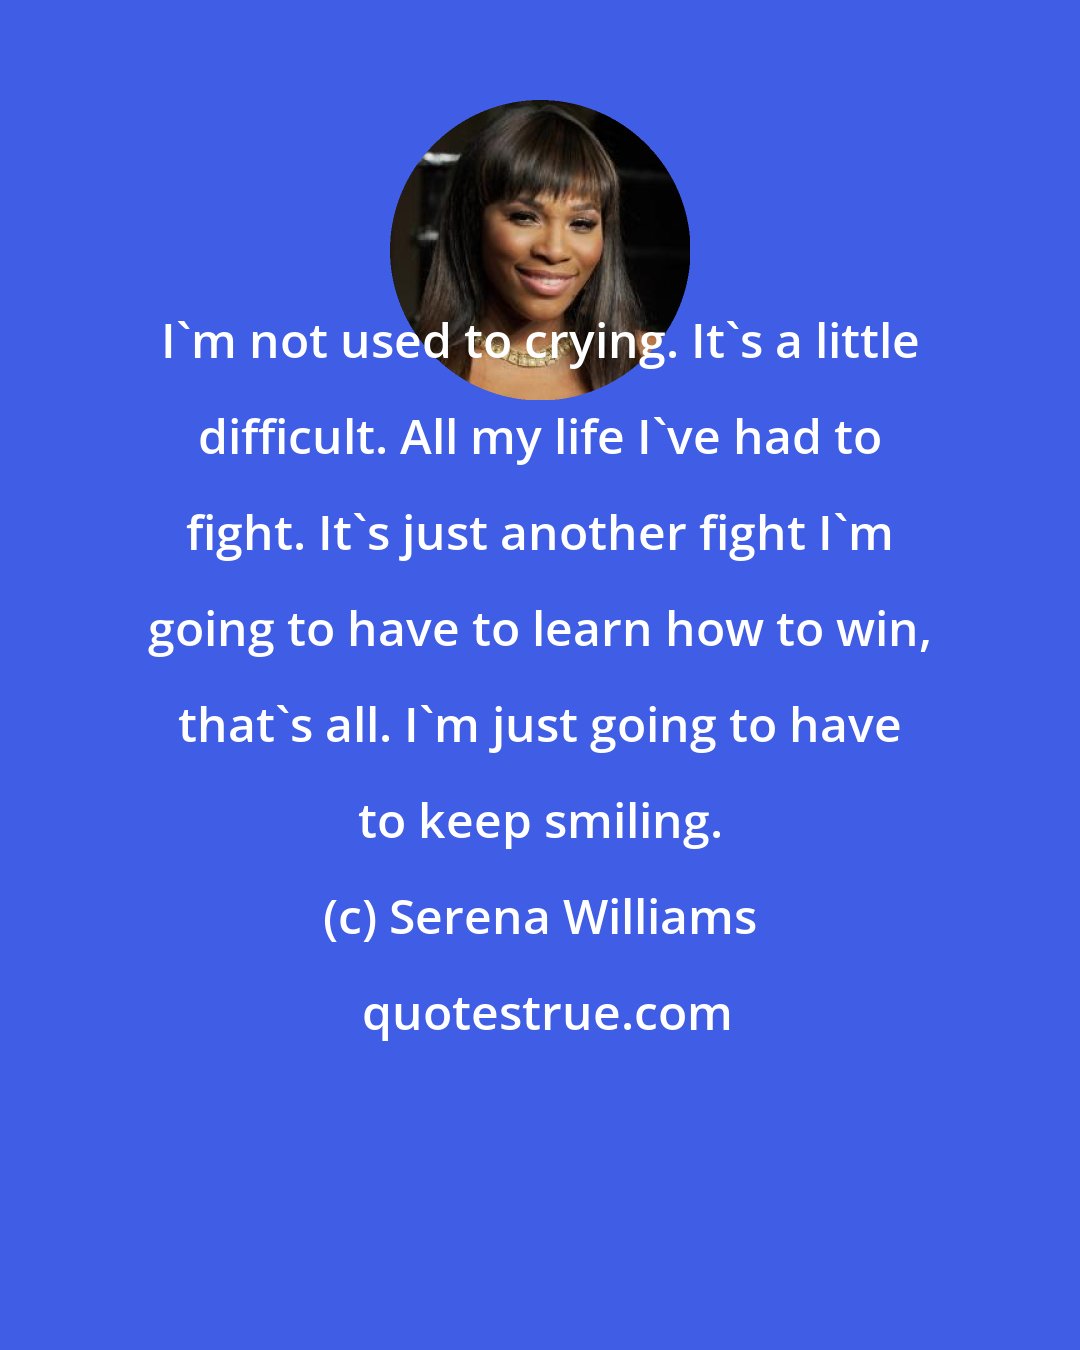 Serena Williams: I'm not used to crying. It's a little difficult. All my life I've had to fight. It's just another fight I'm going to have to learn how to win, that's all. I'm just going to have to keep smiling.